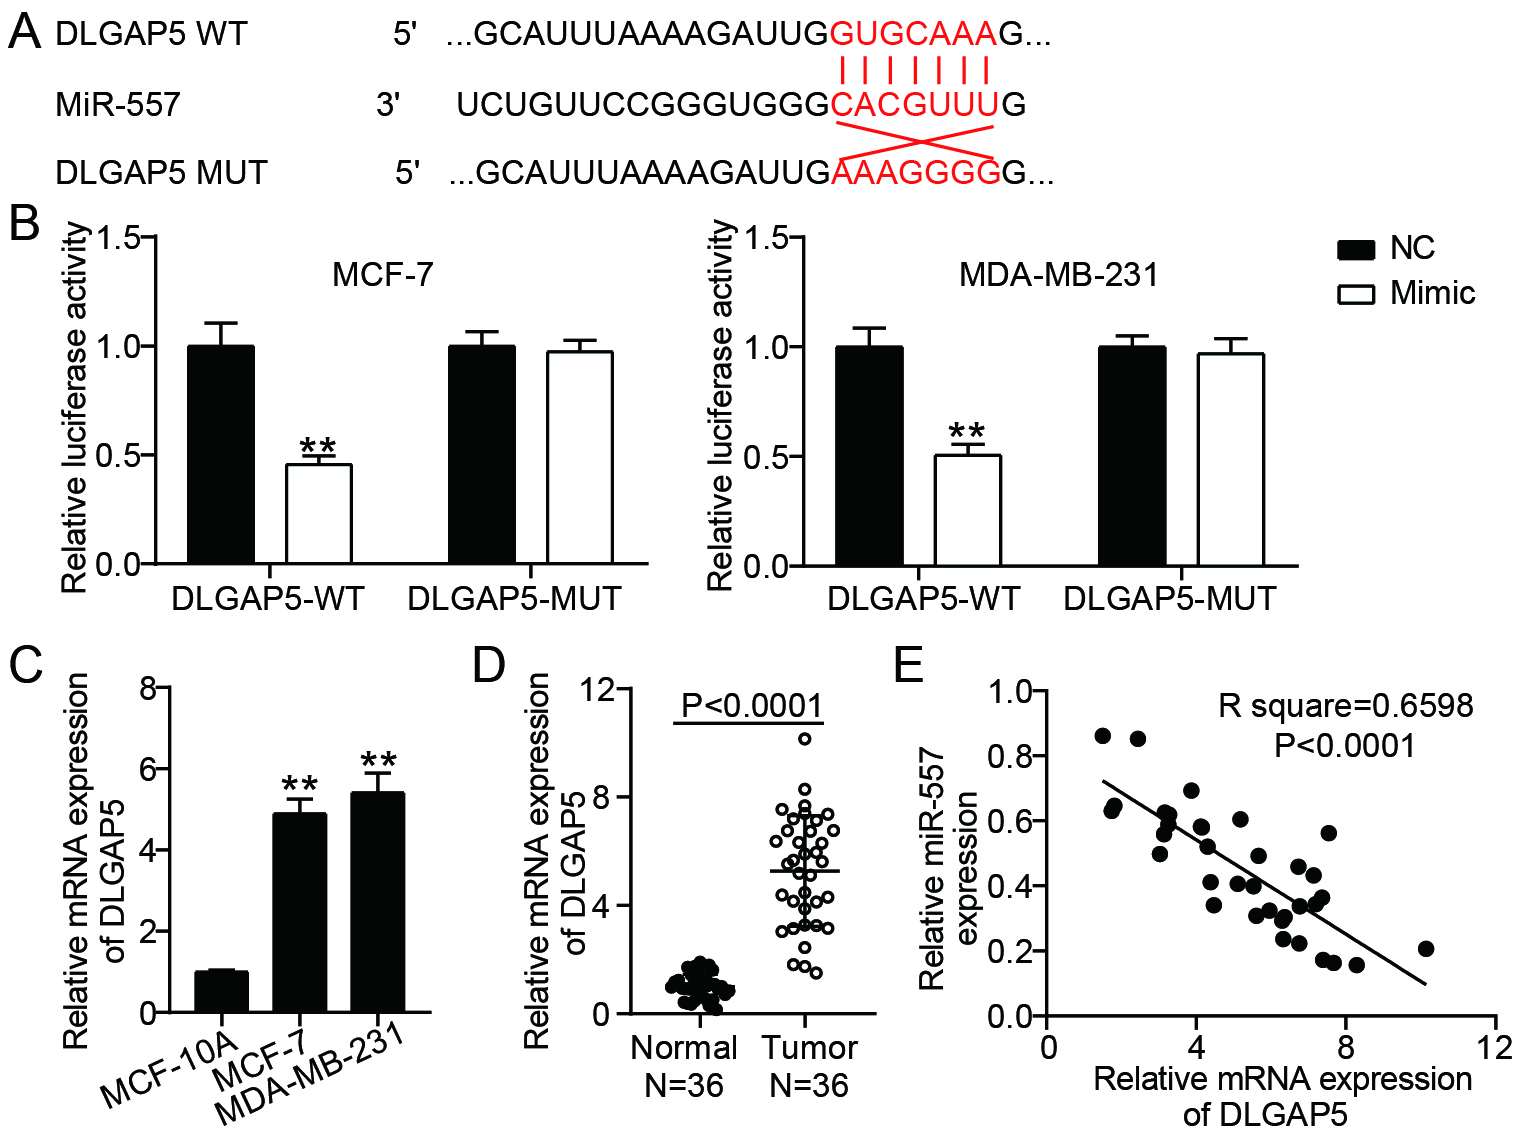 DLGAP5 was a target of miR-557 (A) TargetScan made predictions about the miR-557 and DLGAP5 binding locations. (B) The relationship among miR-557 and DLGAP5 was confirmed by dual-luciferase reporter assay in MDA-MB-231 as well as MCF-7 cells. **P< 0.001 vs. NC. (C) RT-qPCR analysis of DLGAP5 expressions in normal breast cell lines (MCF-10A) and BC cell lines (MCF-7 and MDA-MB-231). **P< 0.001 vs. MCF-10A. (D) DLGAP5 expression in BC and normal tissues was analyzed using RT-qPCR. (E) The association between miR-557 and DLGAP5 in BC tissues was examined using RT-qPCR (Pearson linear regression analysis).